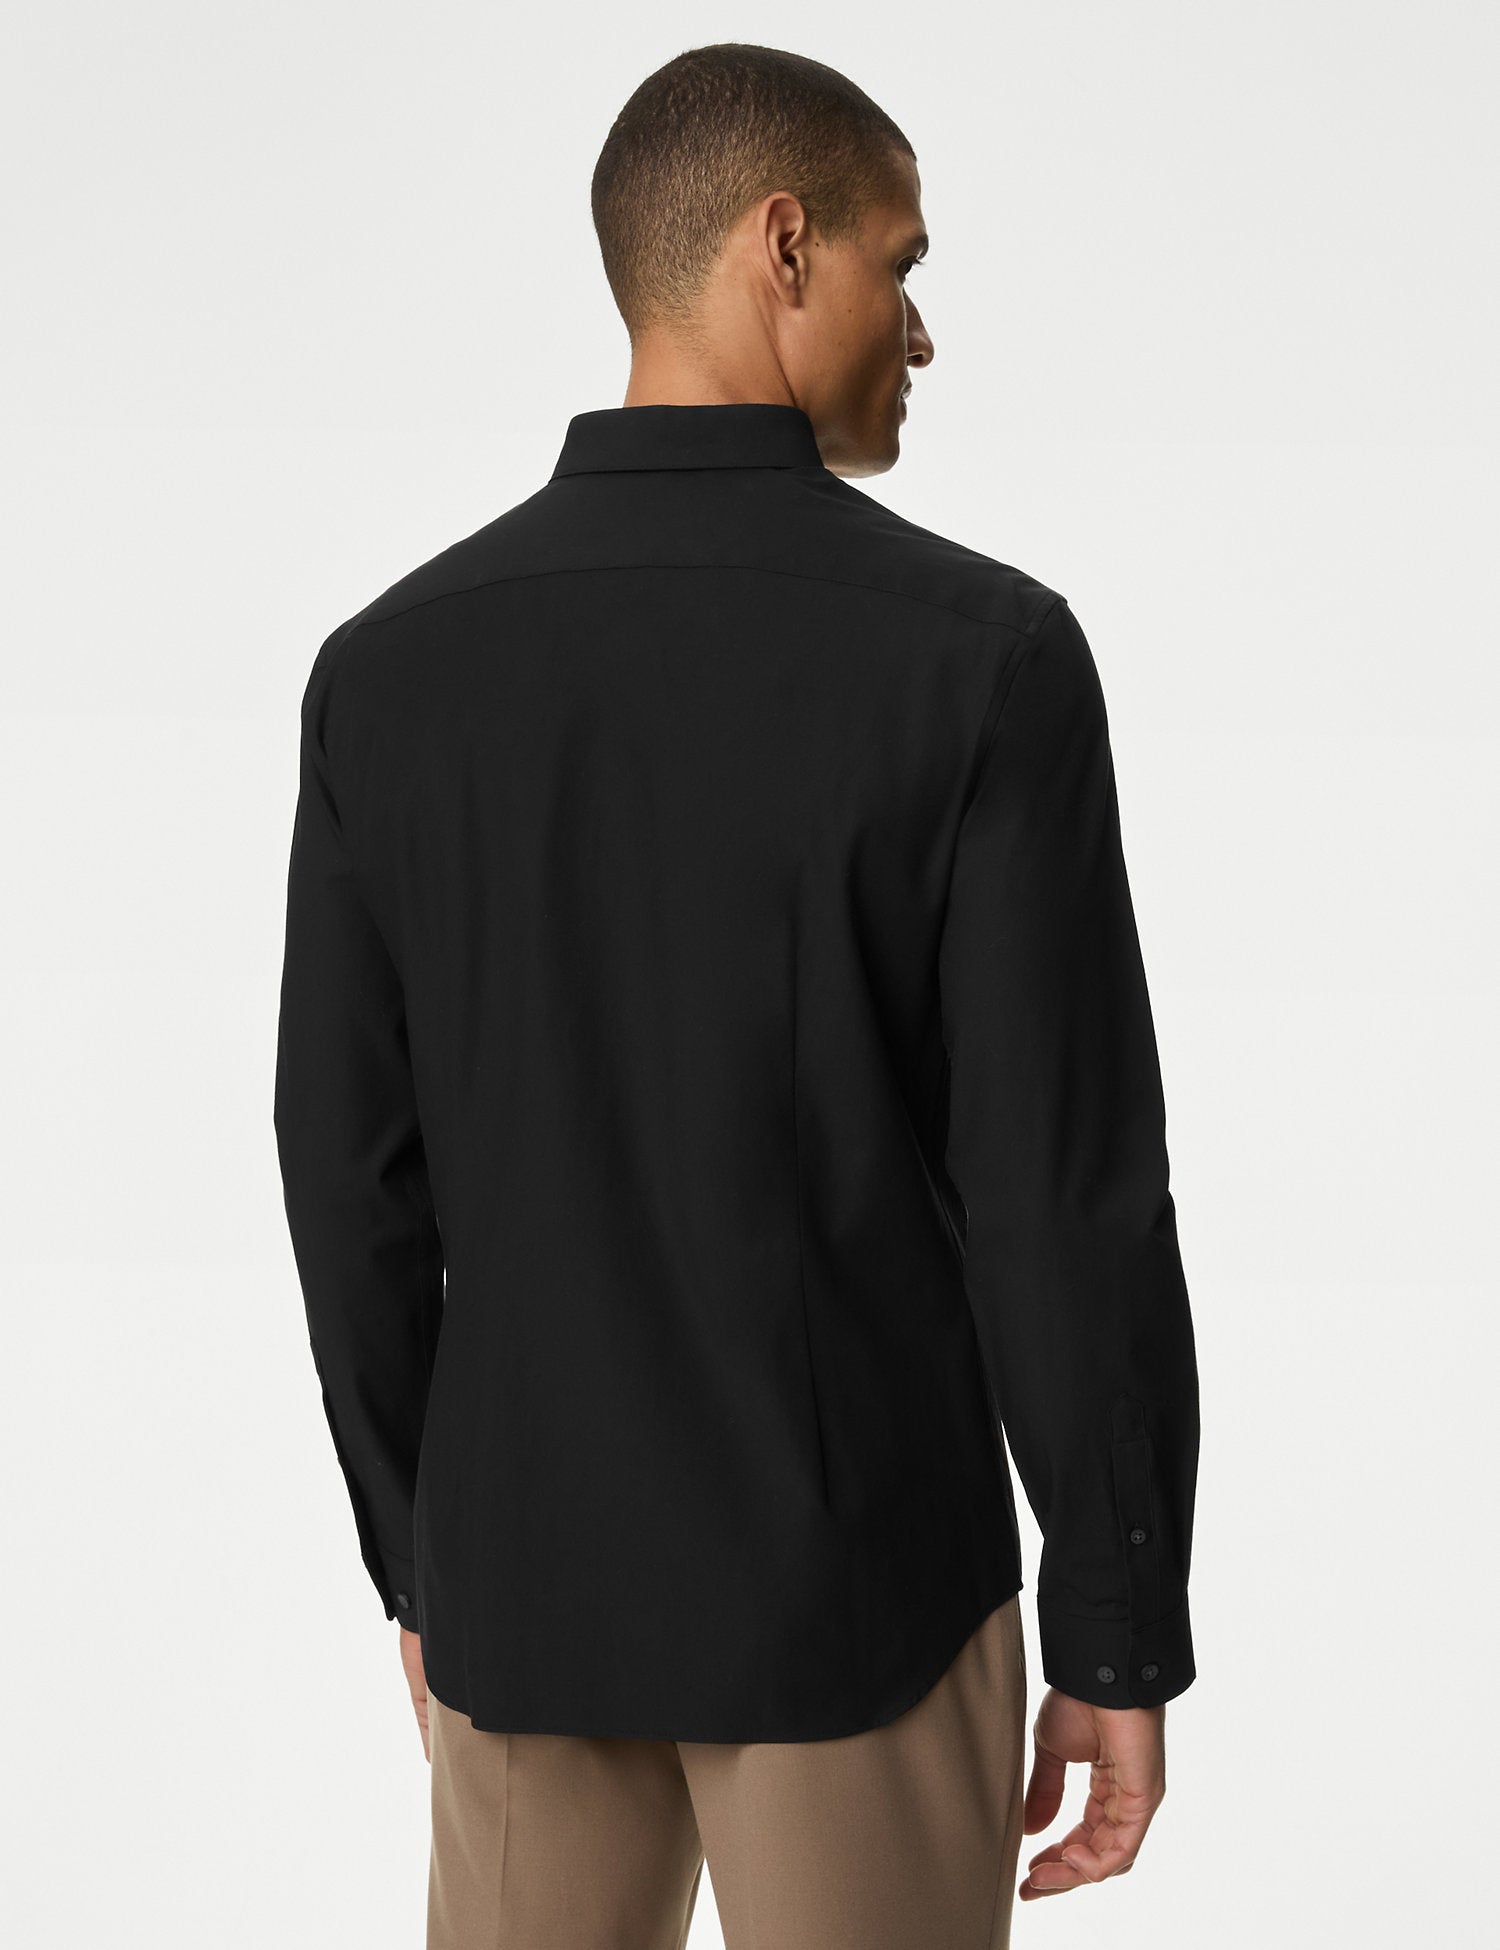 Slim Fit Ultimate Shirt with Stretch